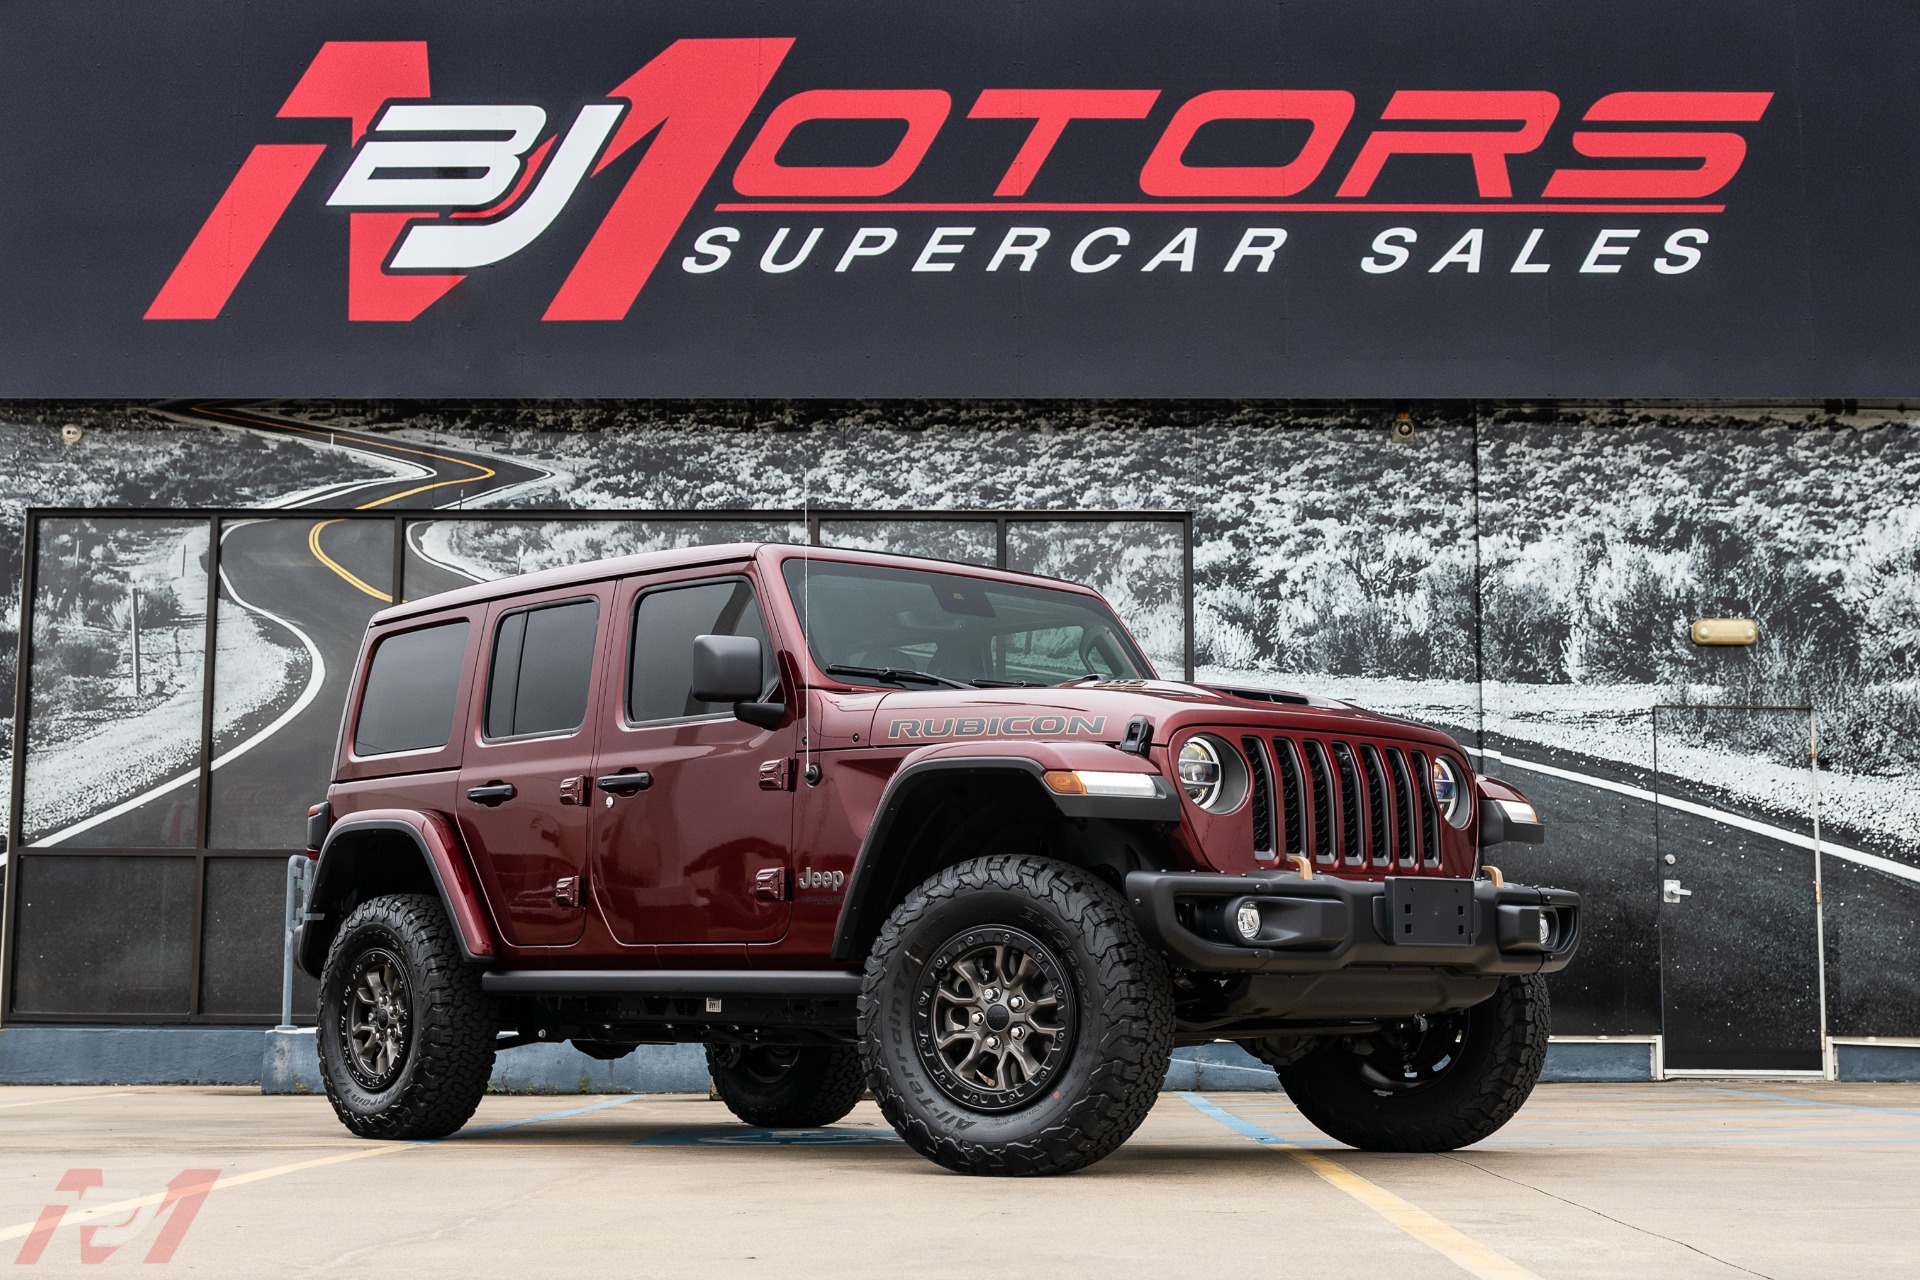 Used 2021 Jeep Wrangler Unlimited Rubicon 392 For Sale (Special Pricing) |  BJ Motors Stock #MW678245